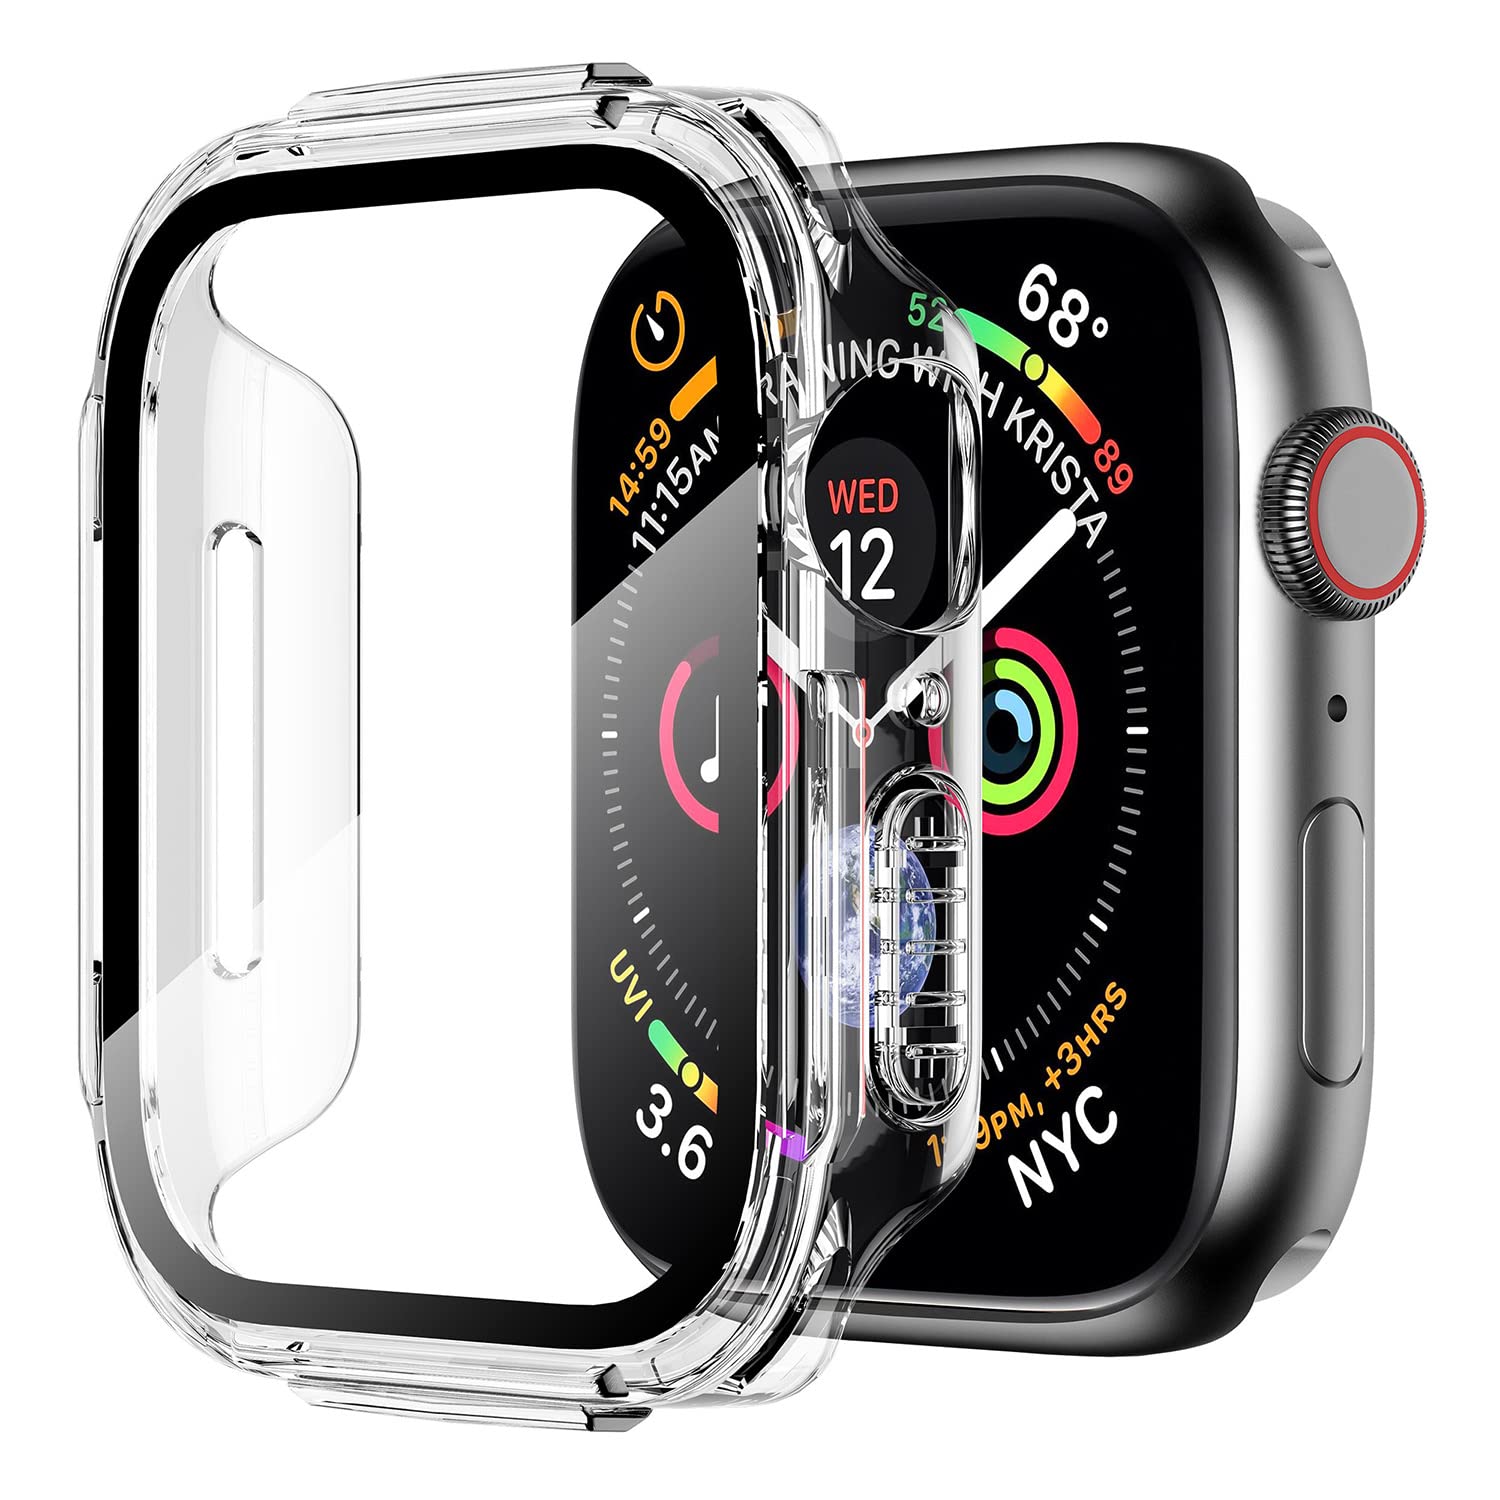 Mesime Rugged case cover compatible for Apple Watch 40mm with Tempered glass Screen for iwatch Series 4 5 6 SE Protective Bumper